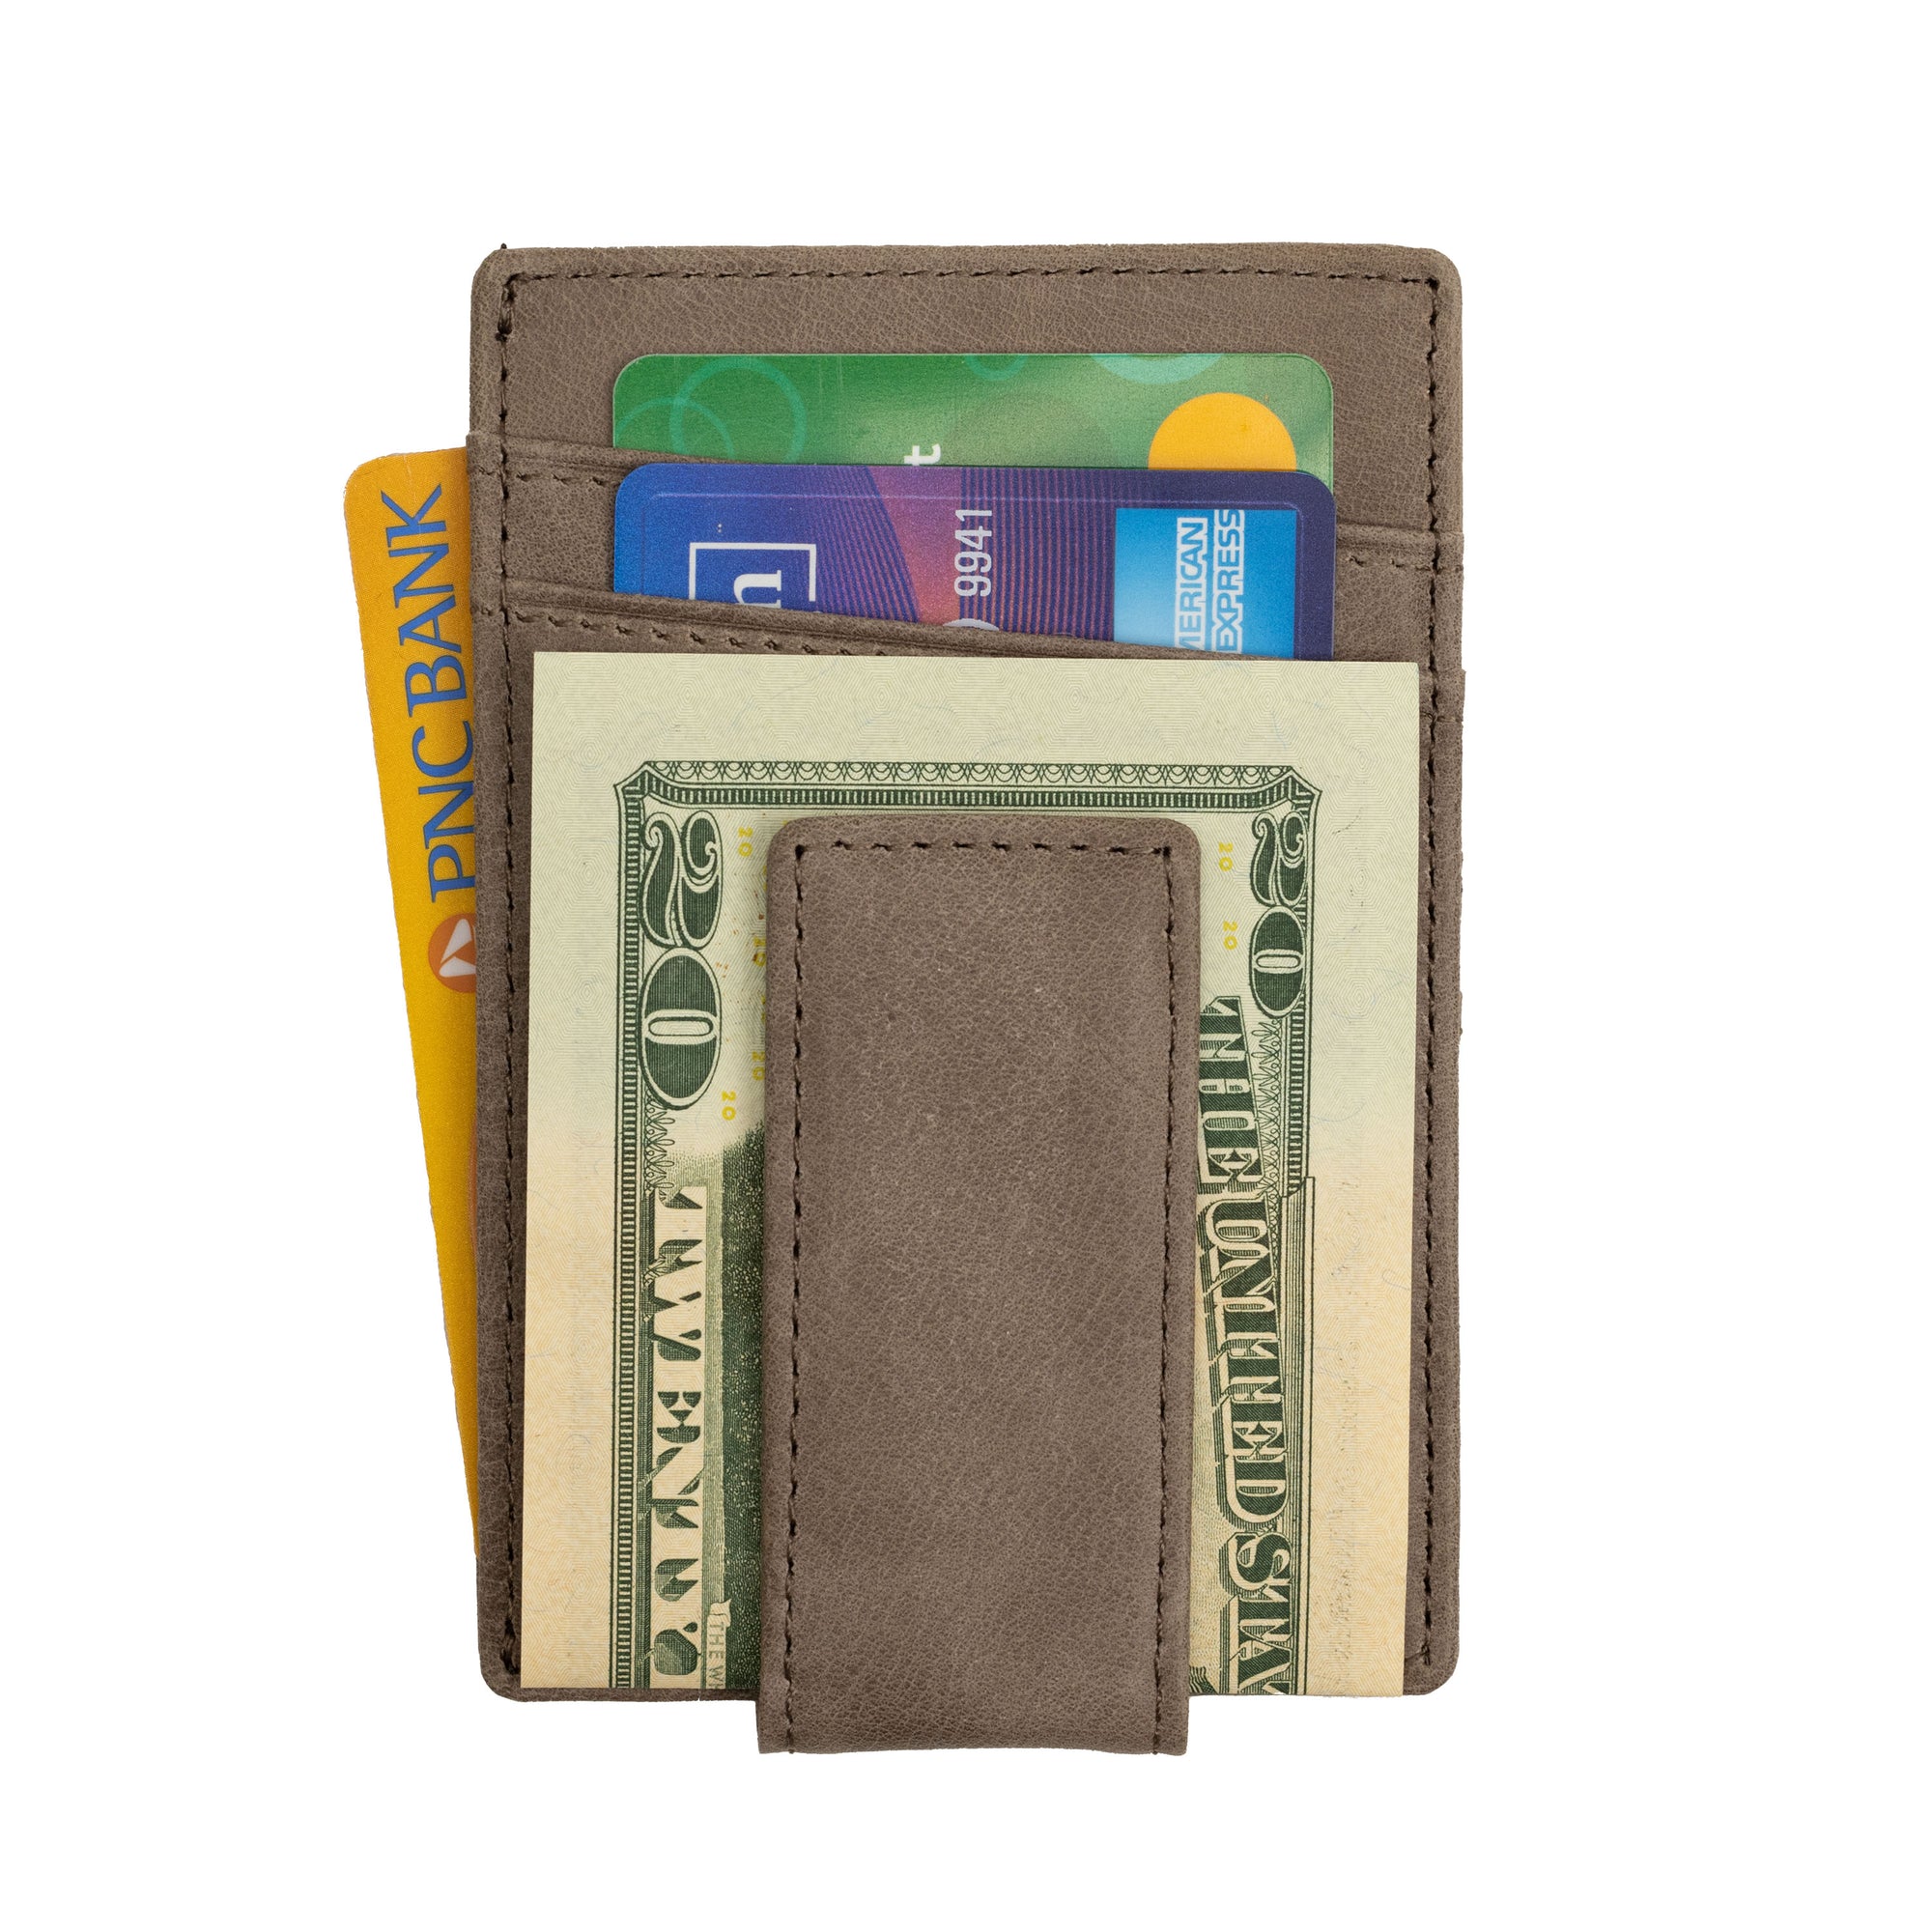 Gray money clip with magnetic bill holder. 